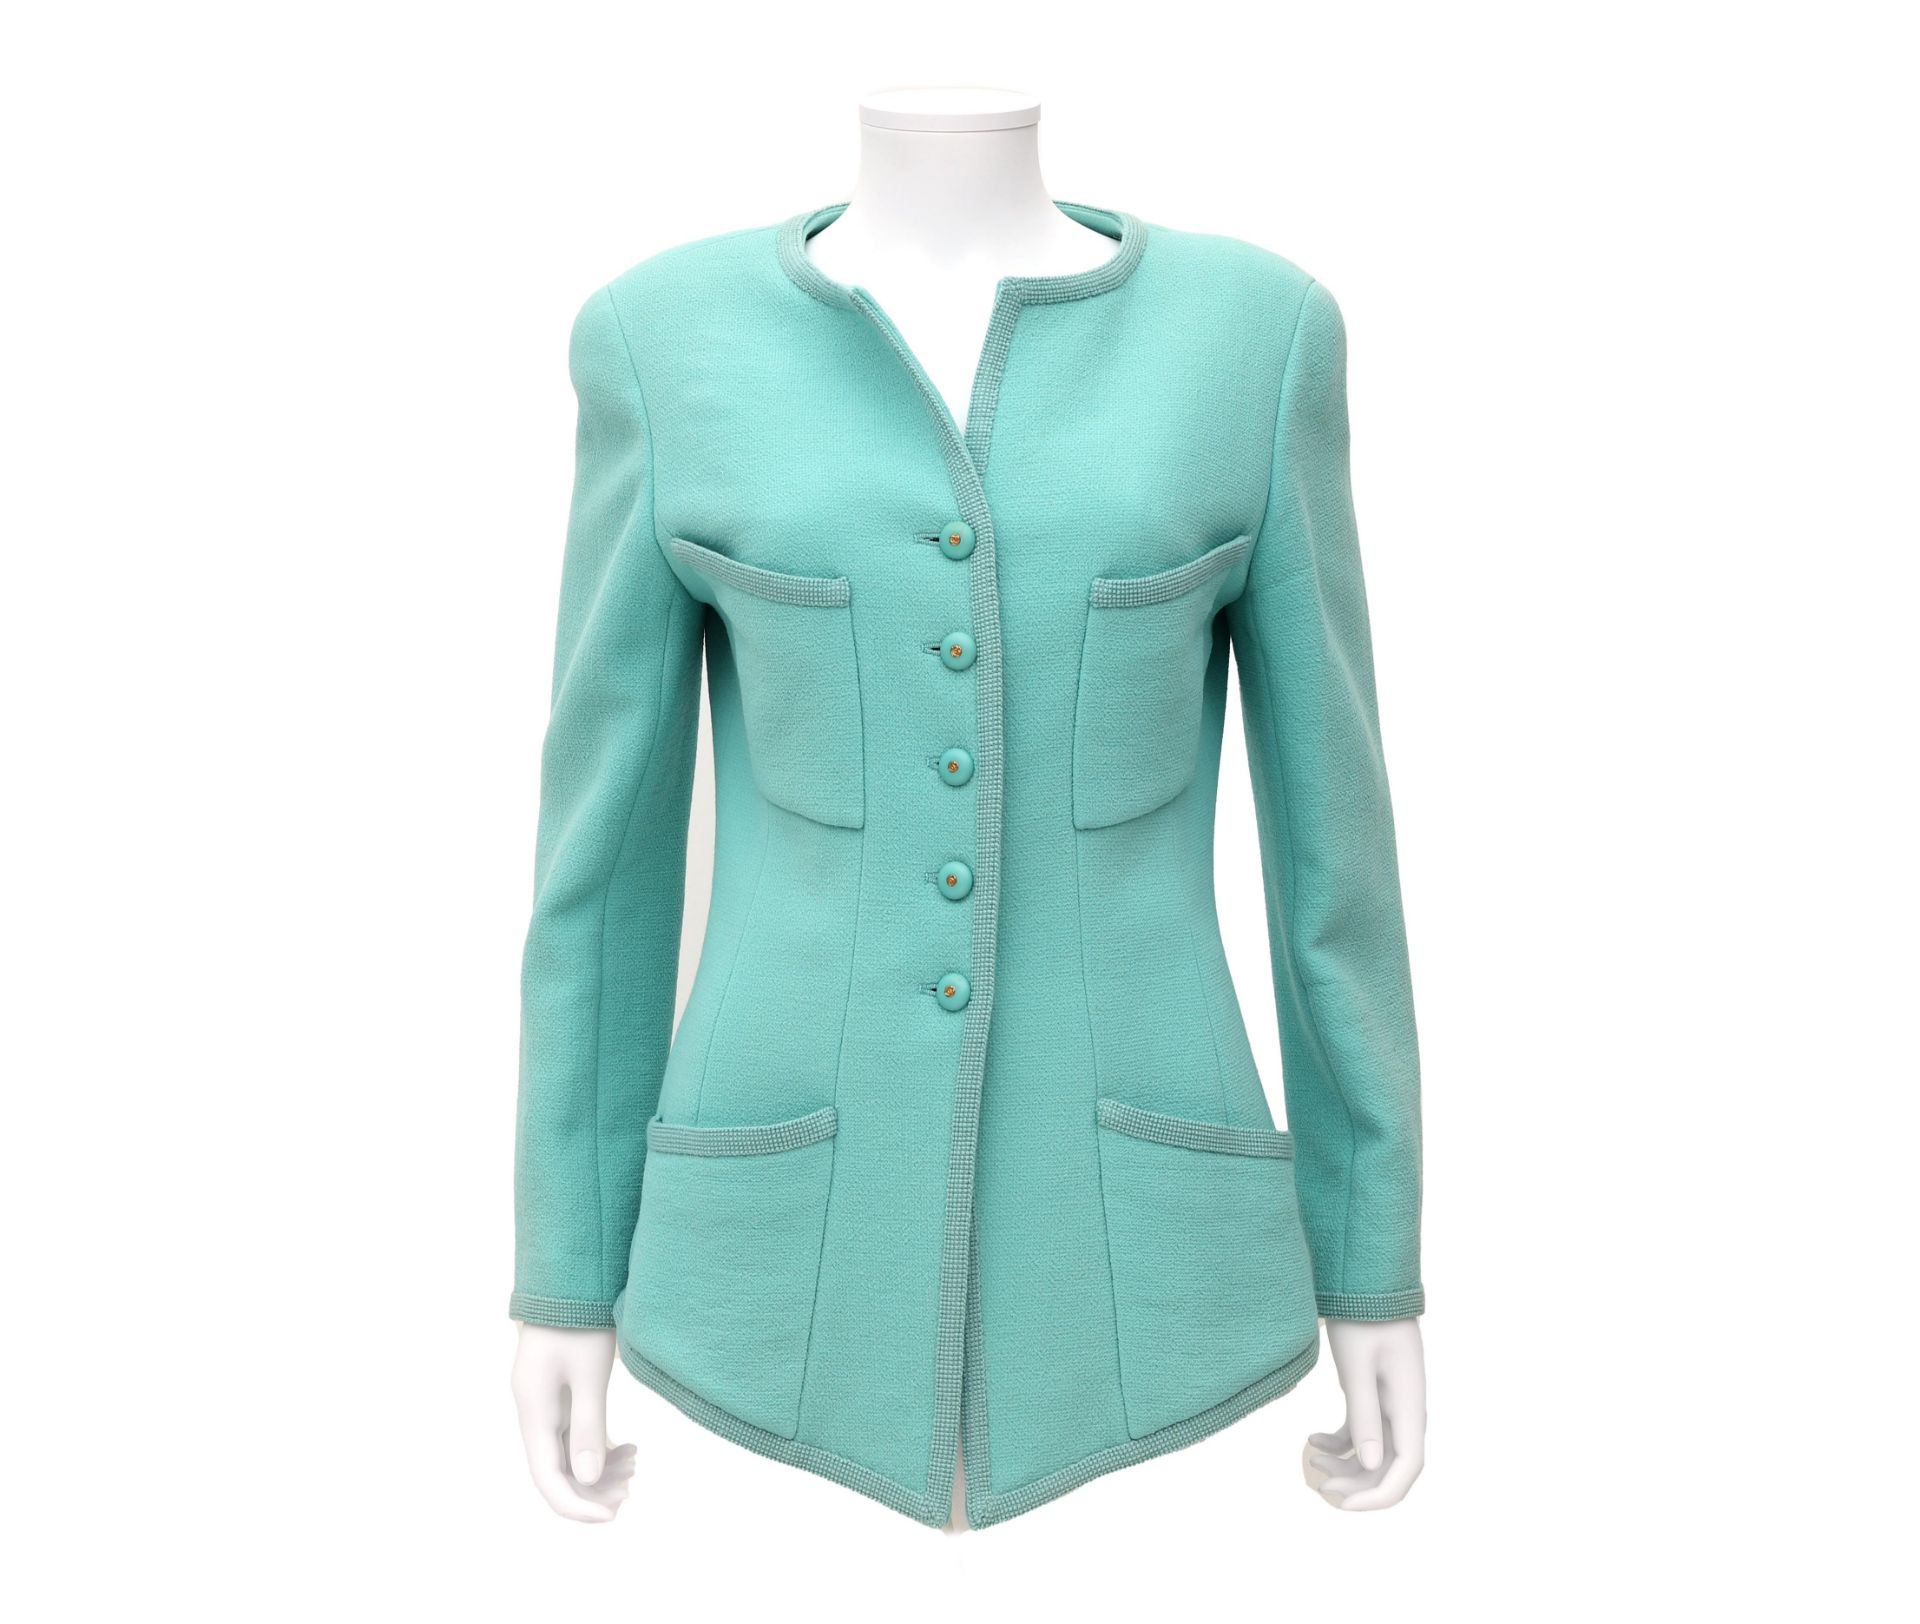 A mint coloured Chanel Boutique jacket. External chest pockets and two side pockets and mint colored